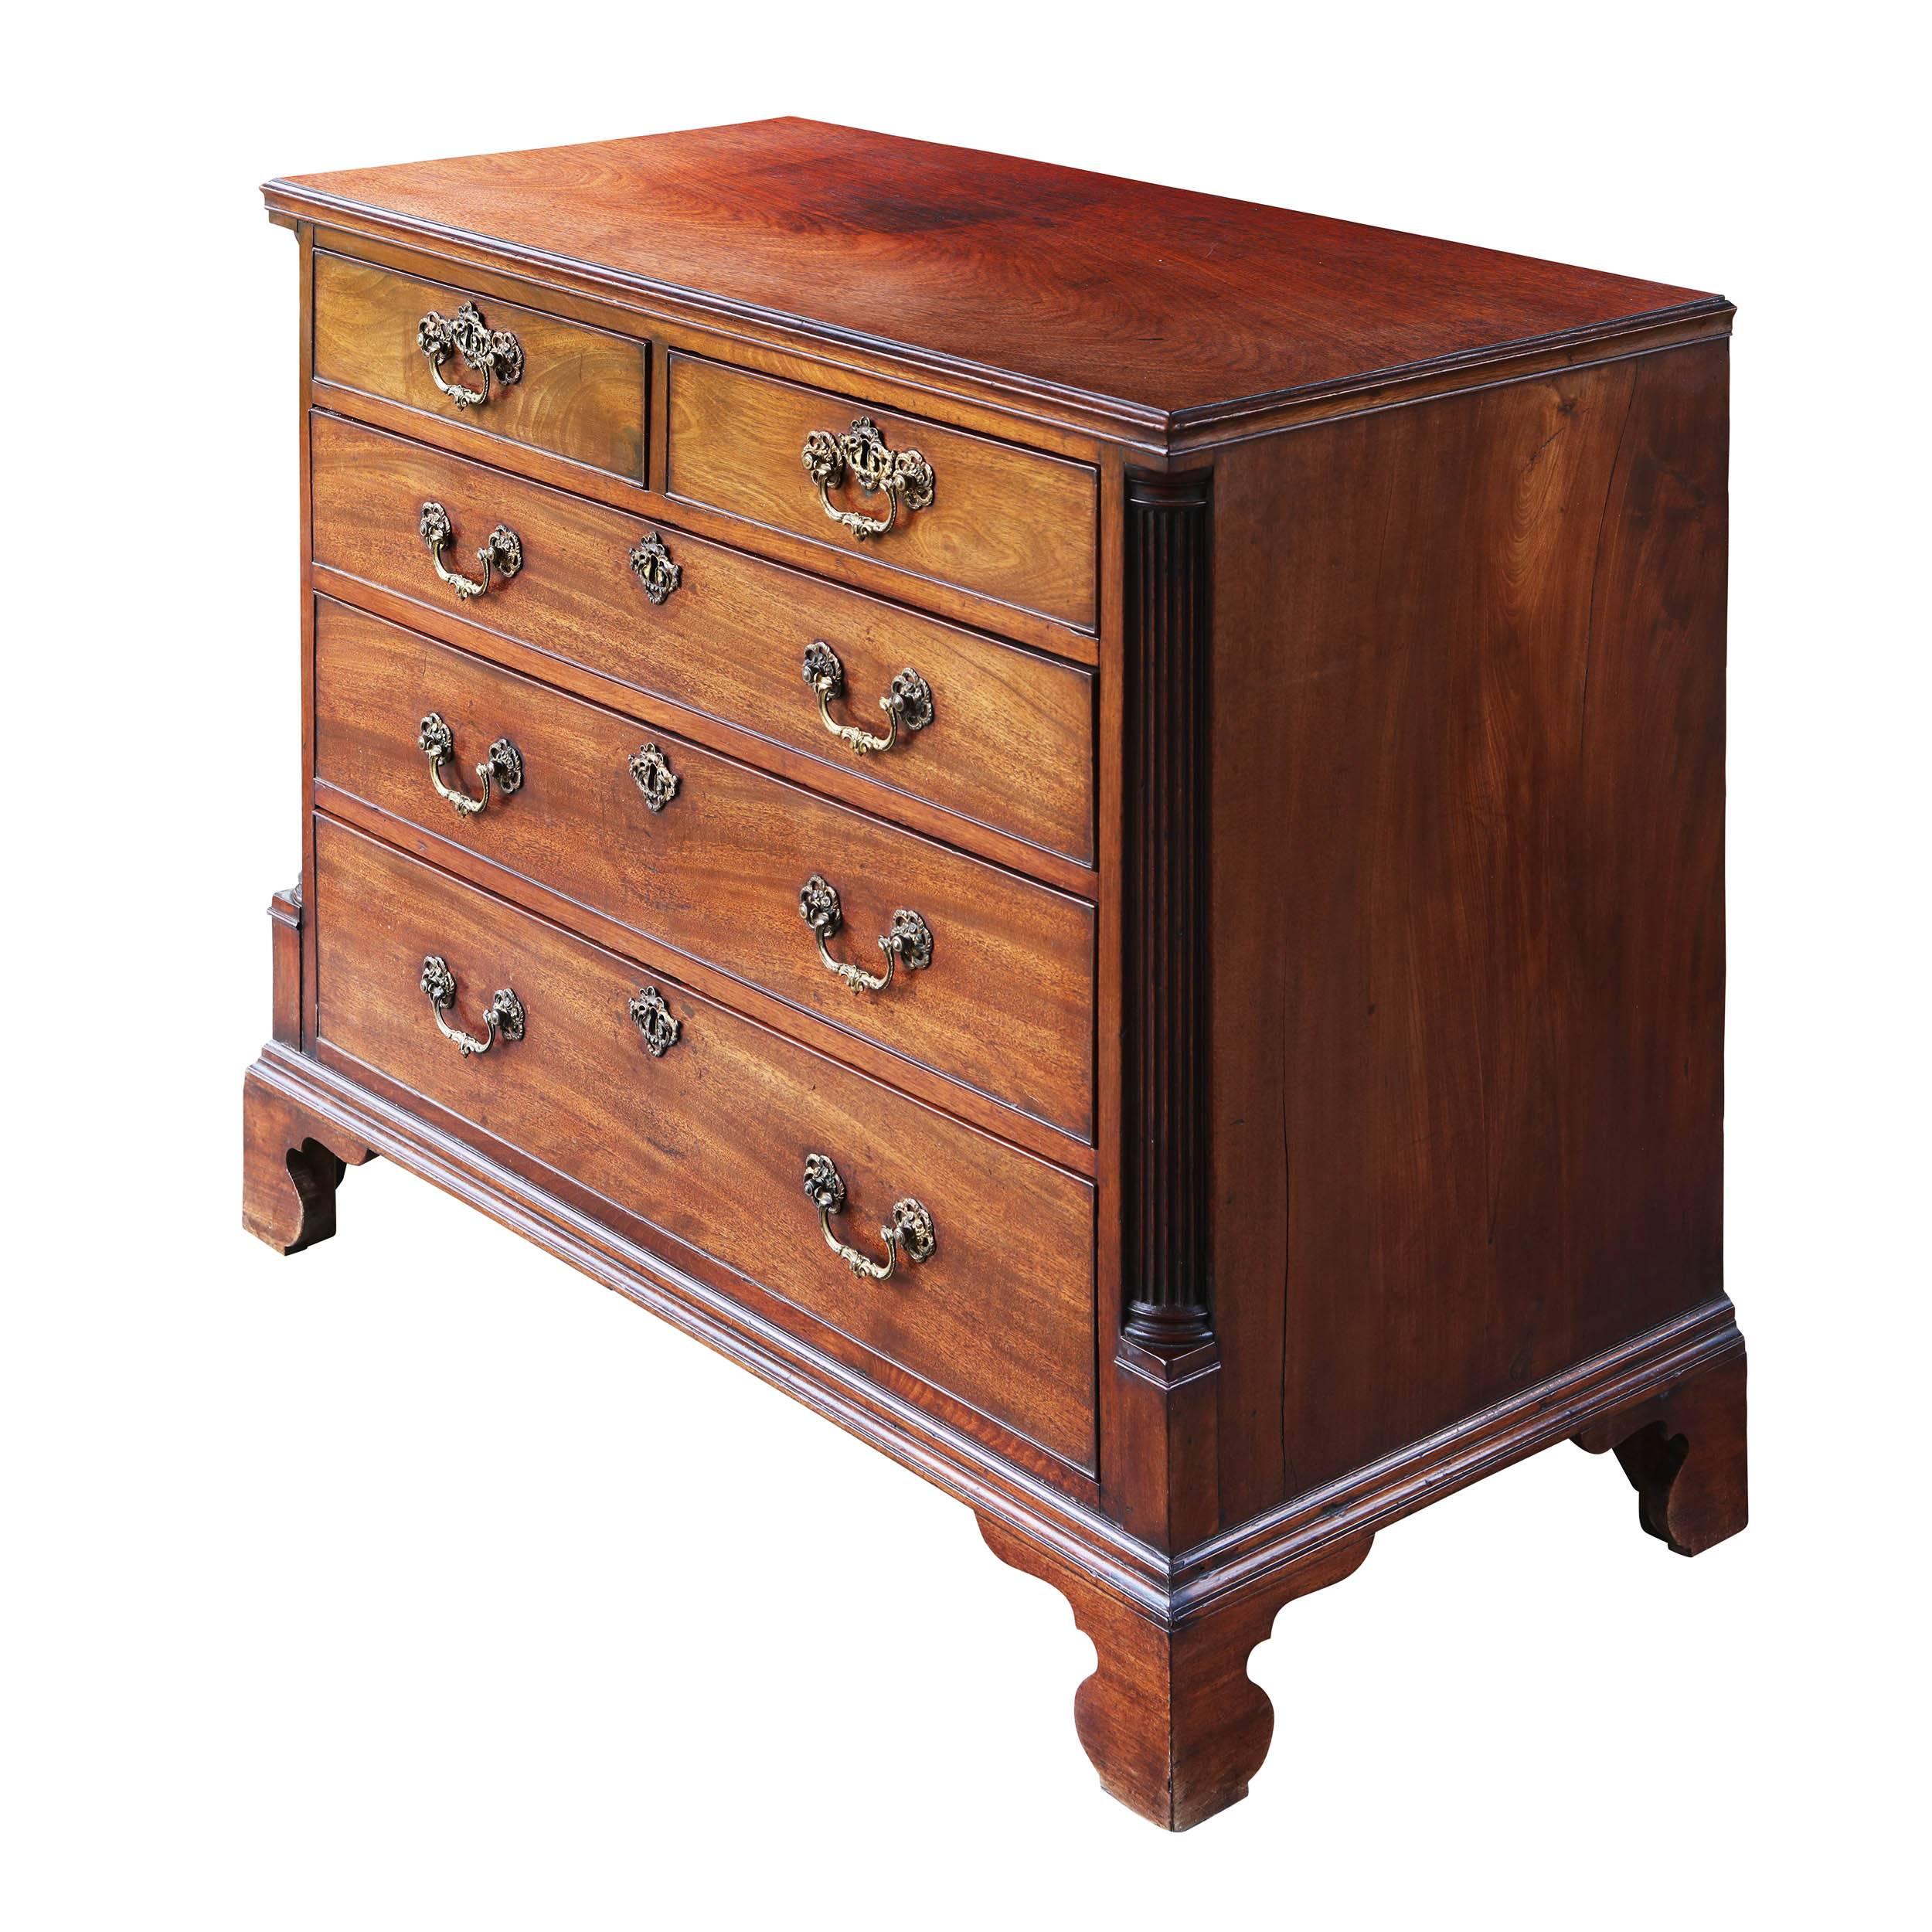 Fine Chippendale Period Mahogany Chest of Drawers In Excellent Condition For Sale In London, by appointment only